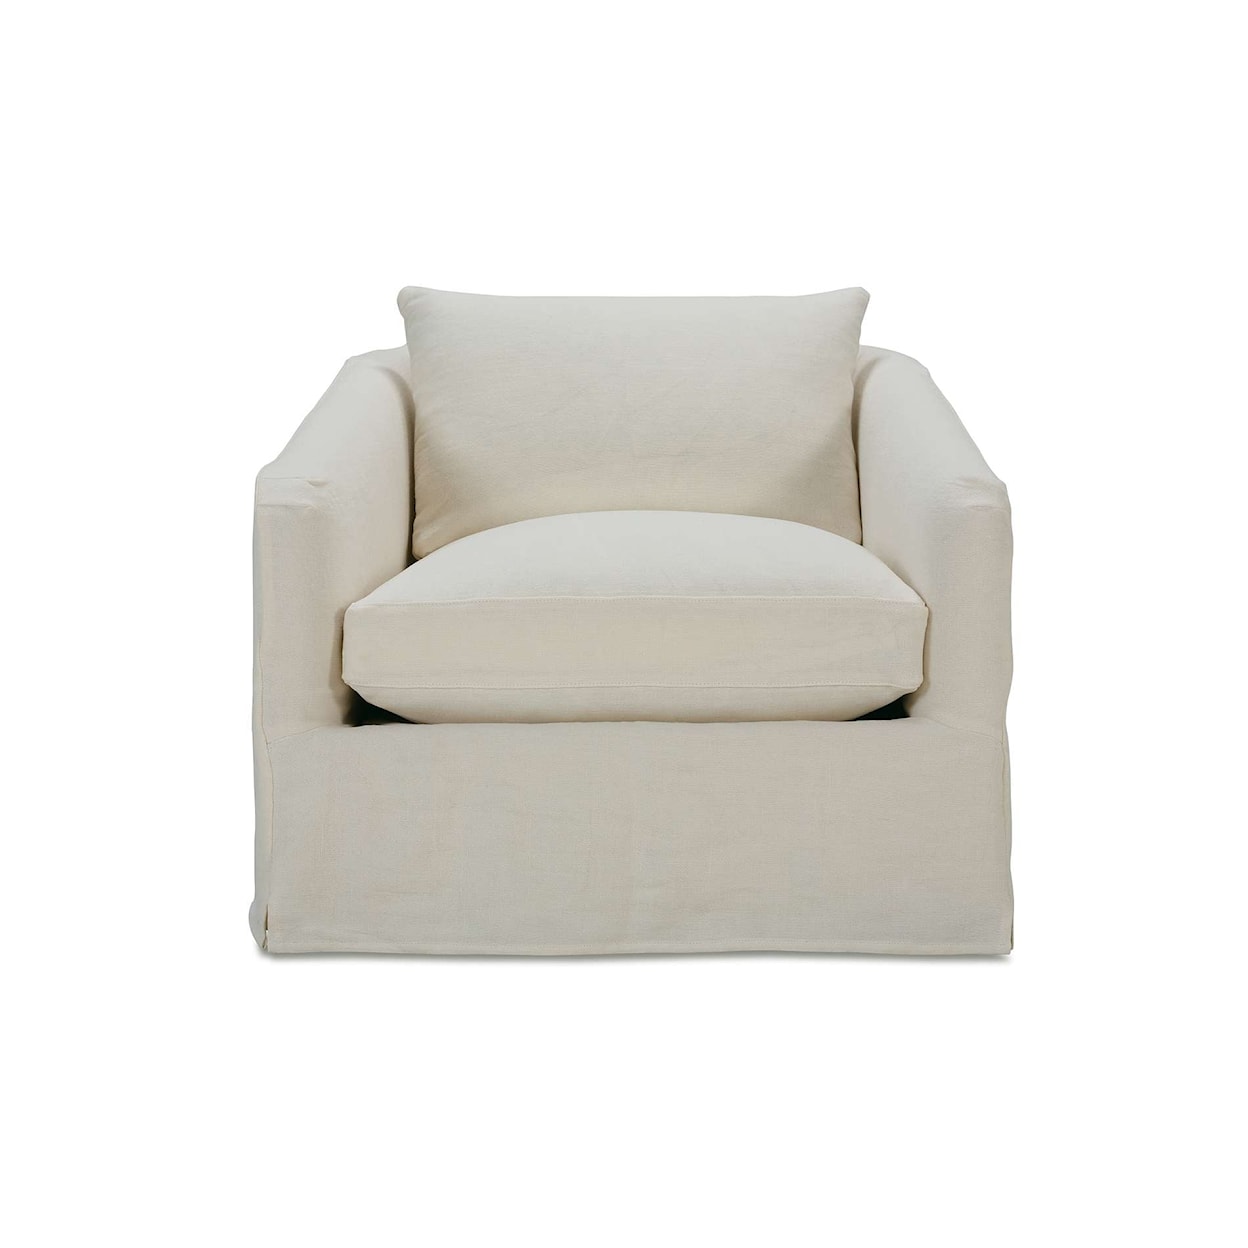 Robin Bruce Florence Swivel Chair with Slipcover